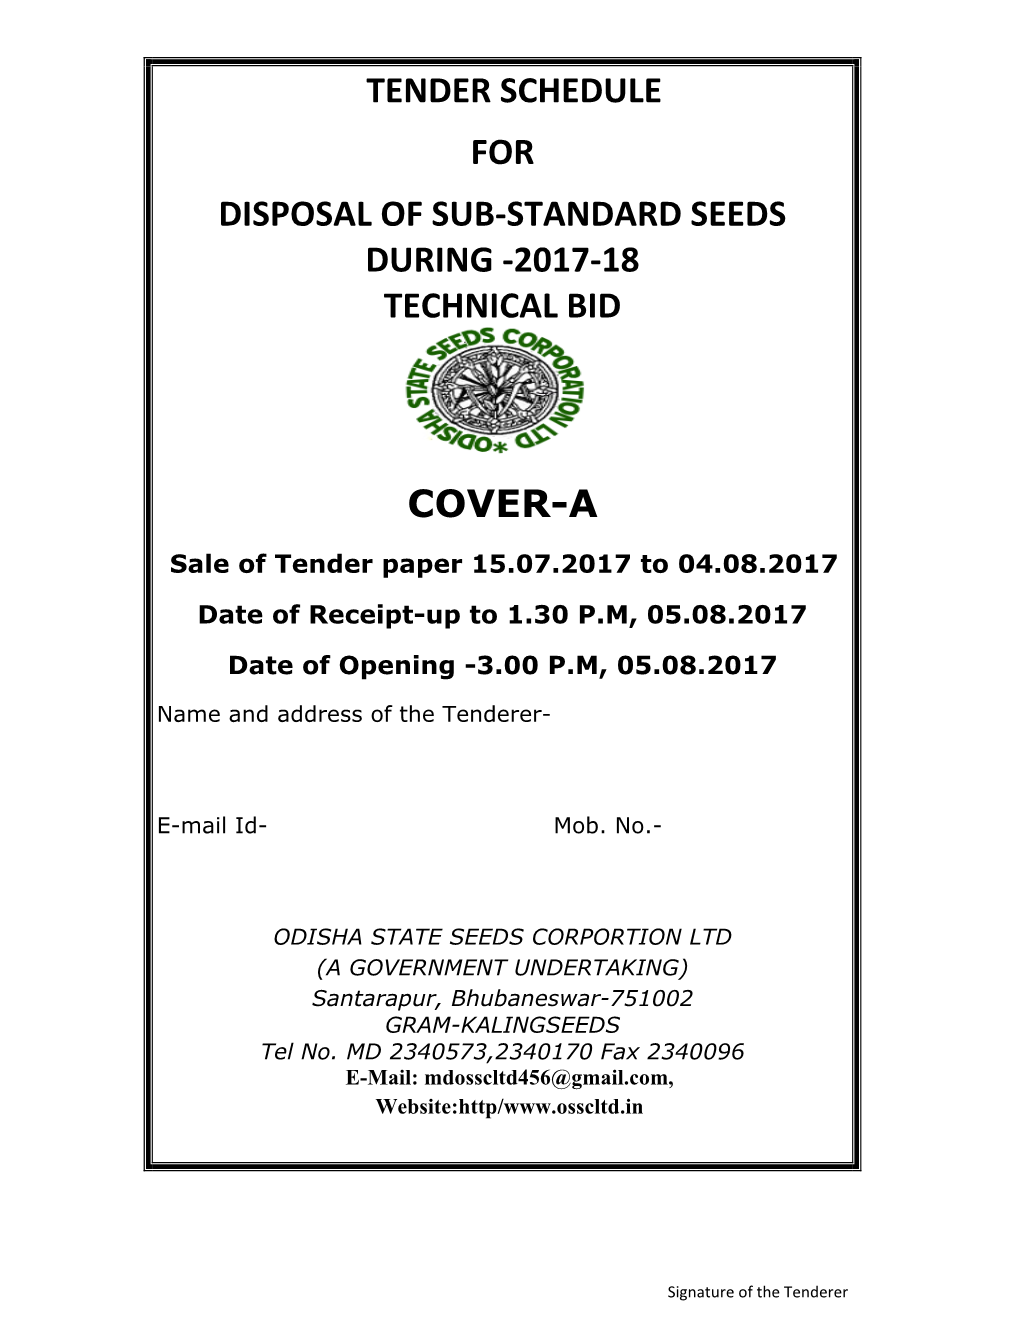 Tender Schedule for Disposal of Sub-Standard Seeds During -2017-18 Technical Bid